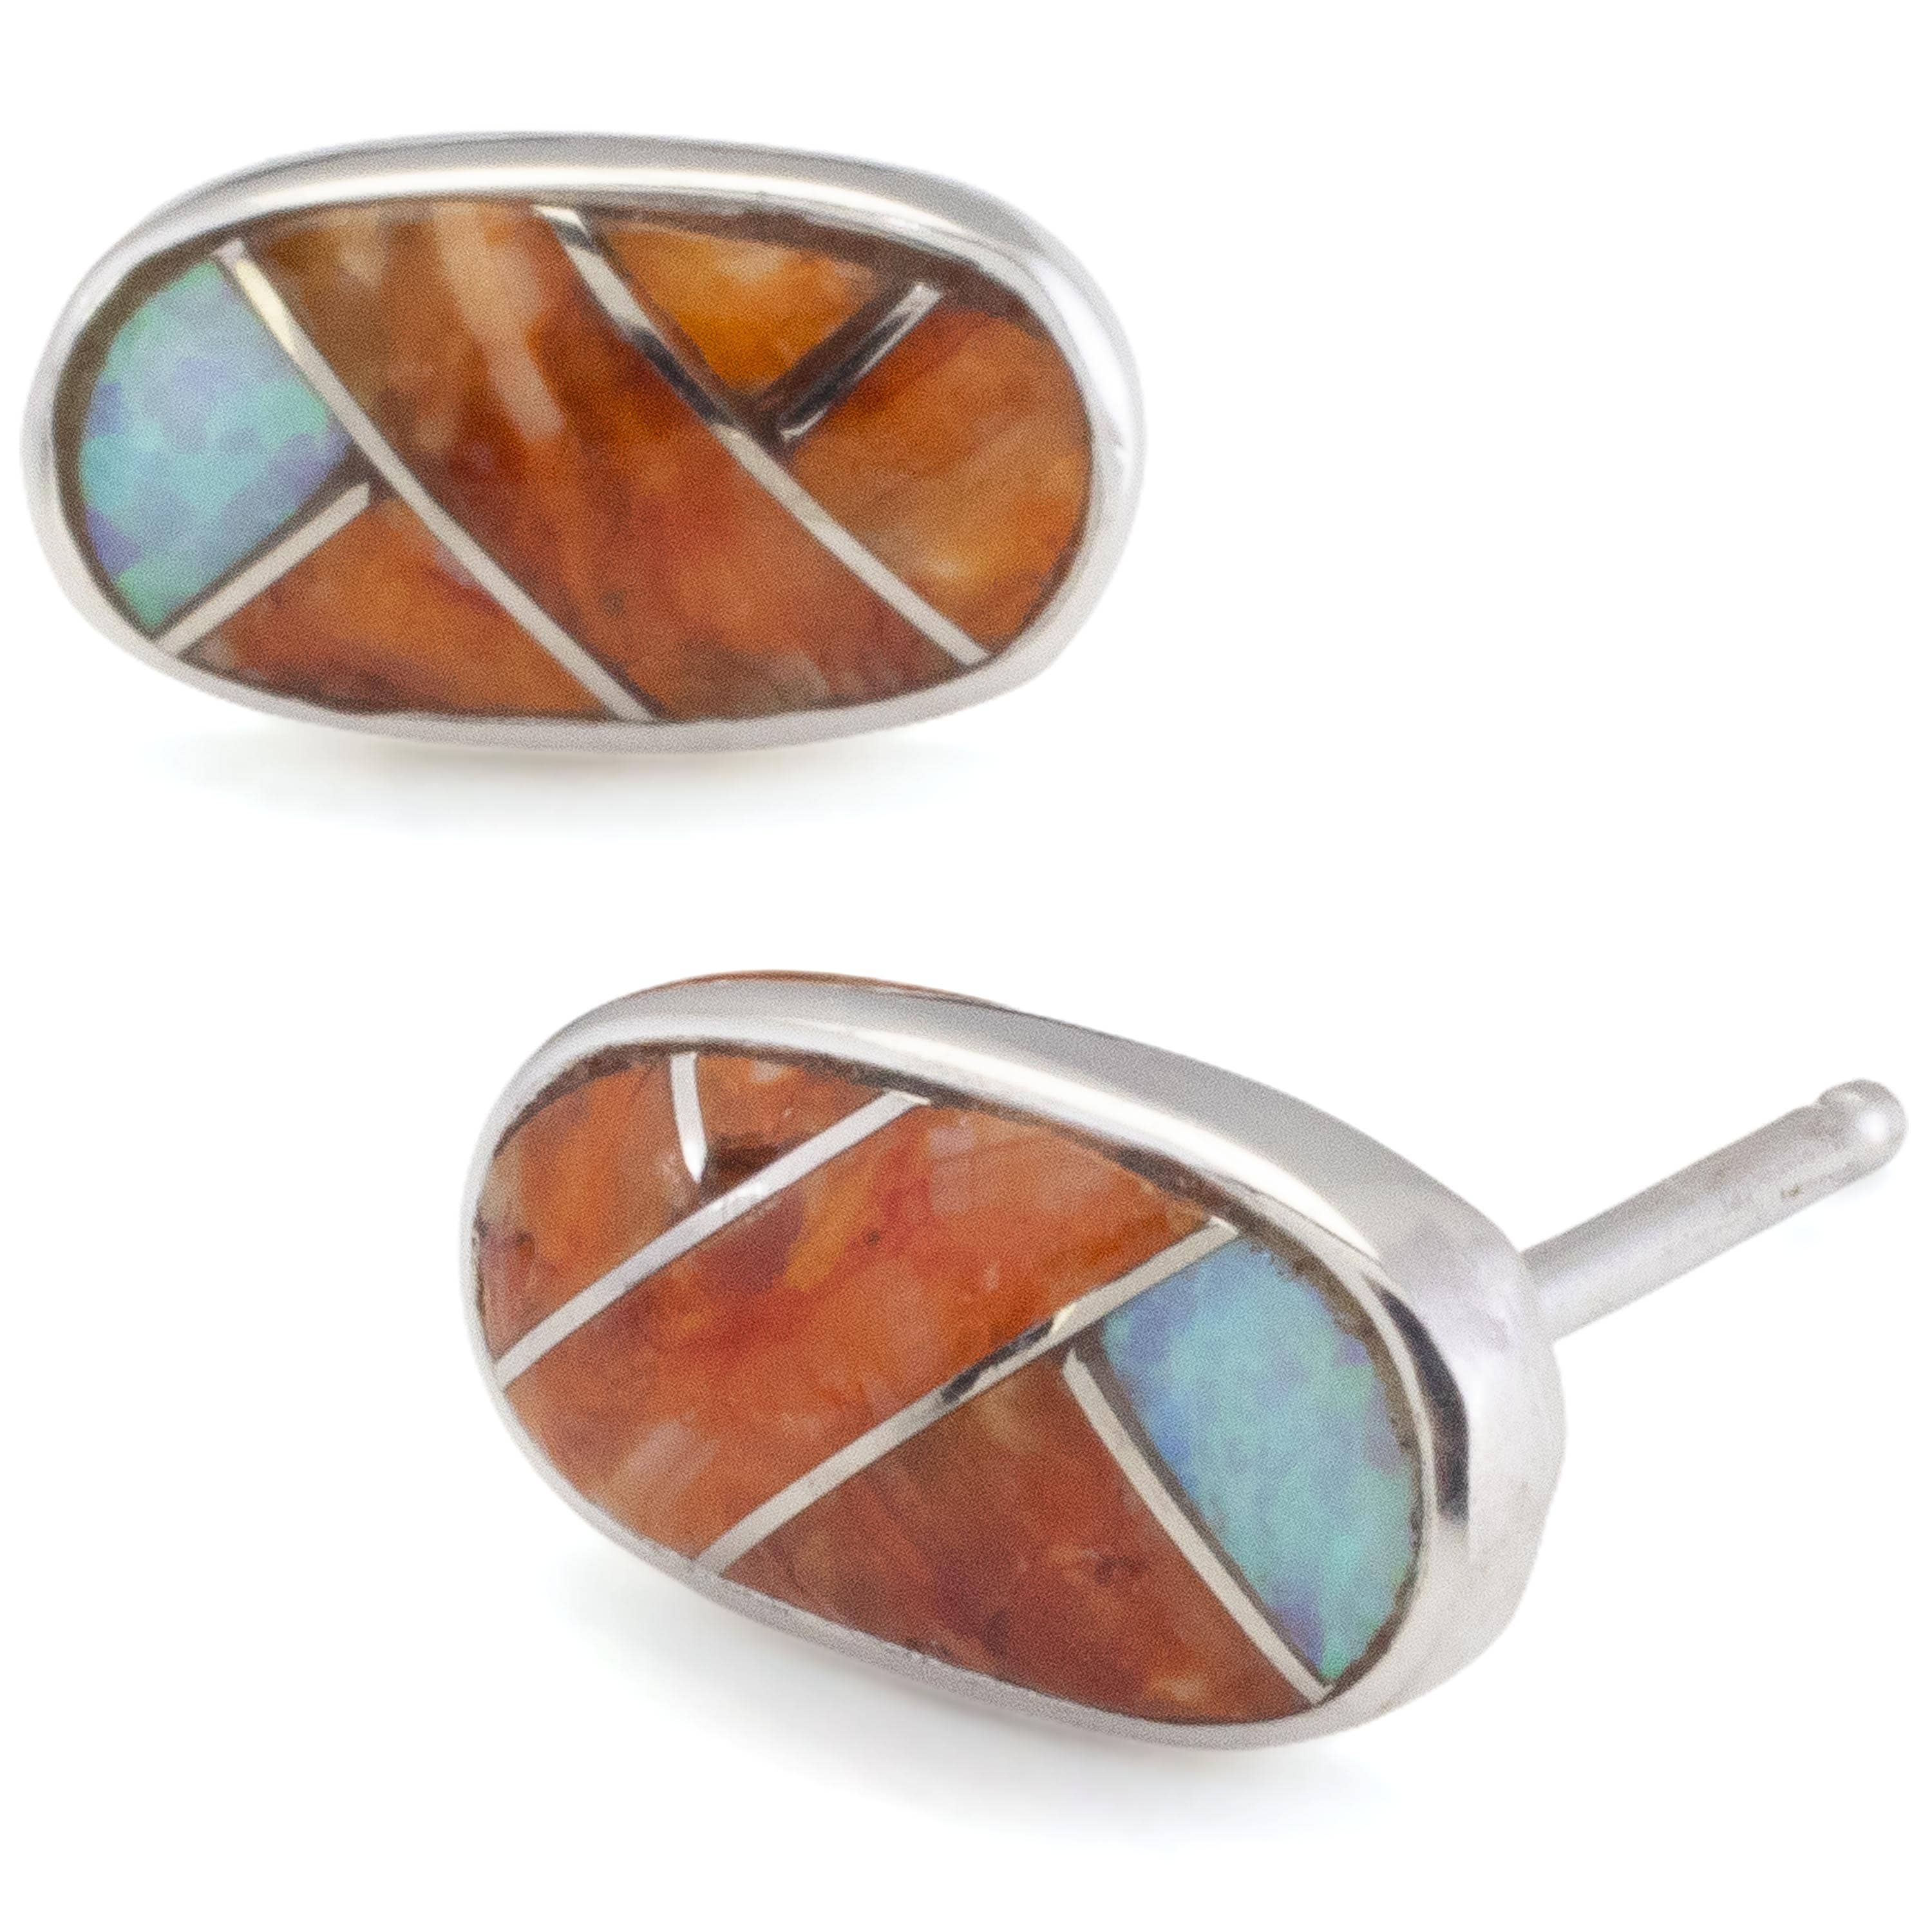 Kalifano Southwest Silver Jewelry Spiny Oyster Shell Oval 925 Sterling Silver Earring with Stud Backing USA Handmade with Aqua Opal Accent NME.2238.SP